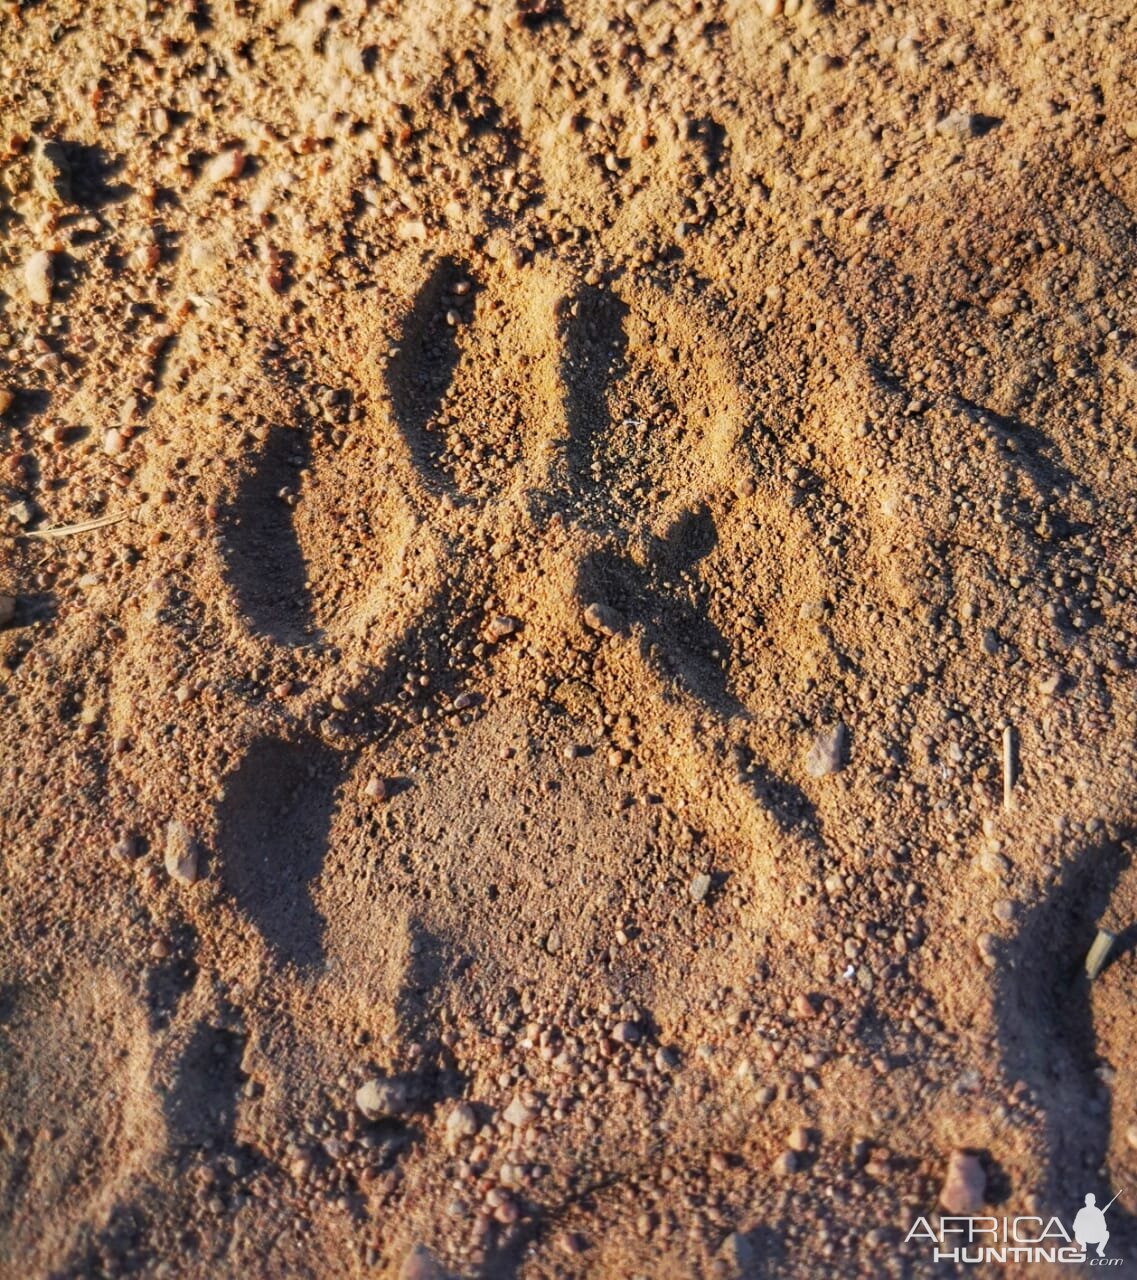 Lion Footprint Limpopo South Africa